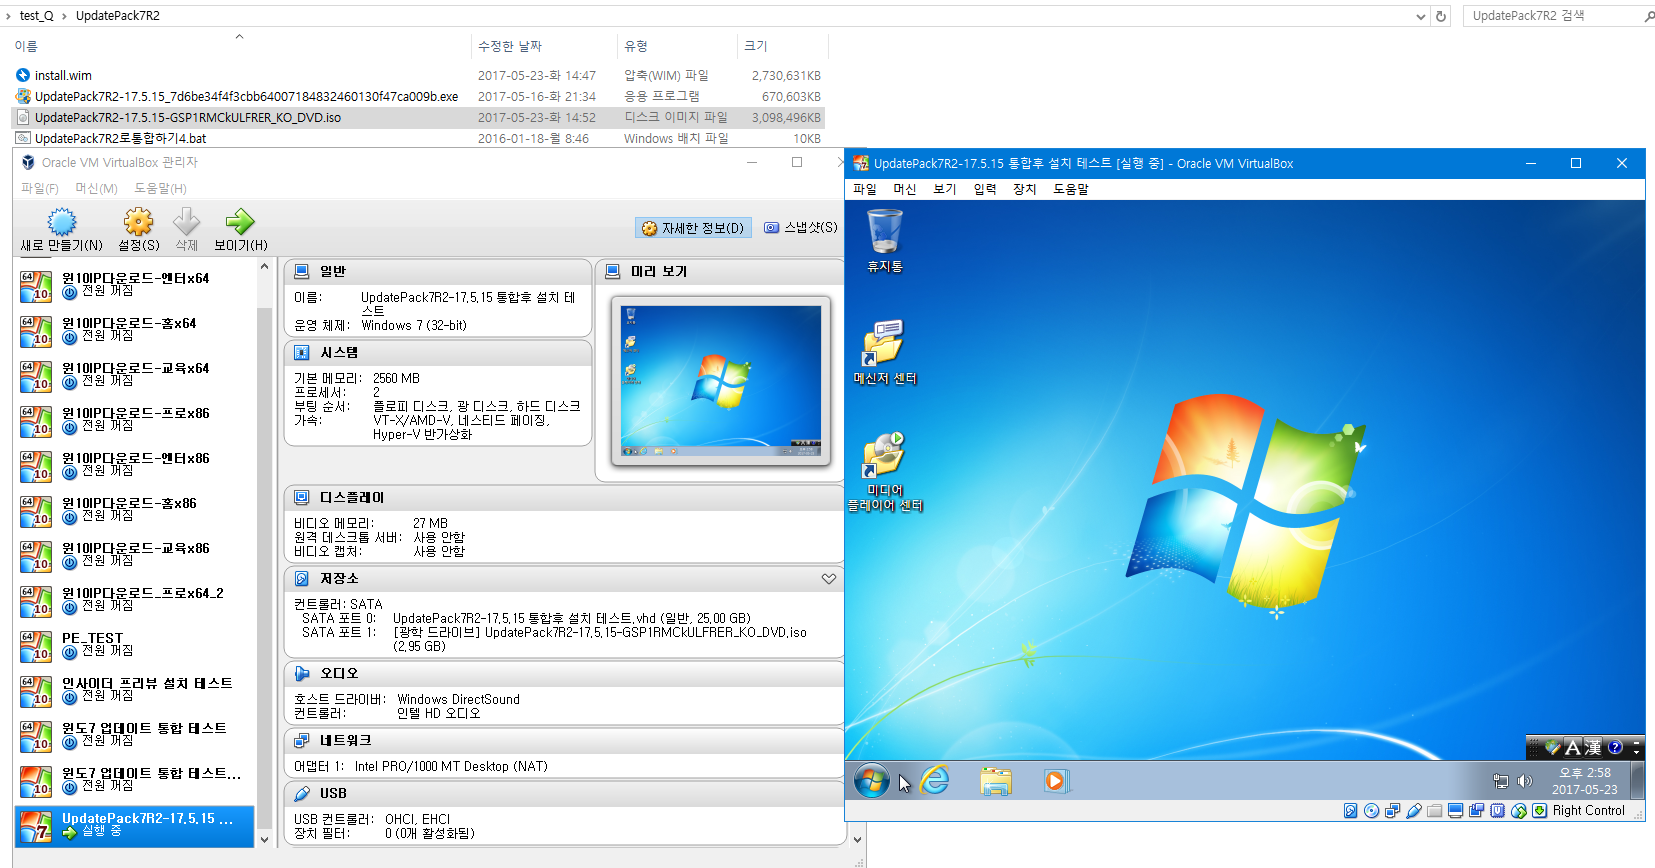 UpdatePack7R2 23.6.14 download the new for windows